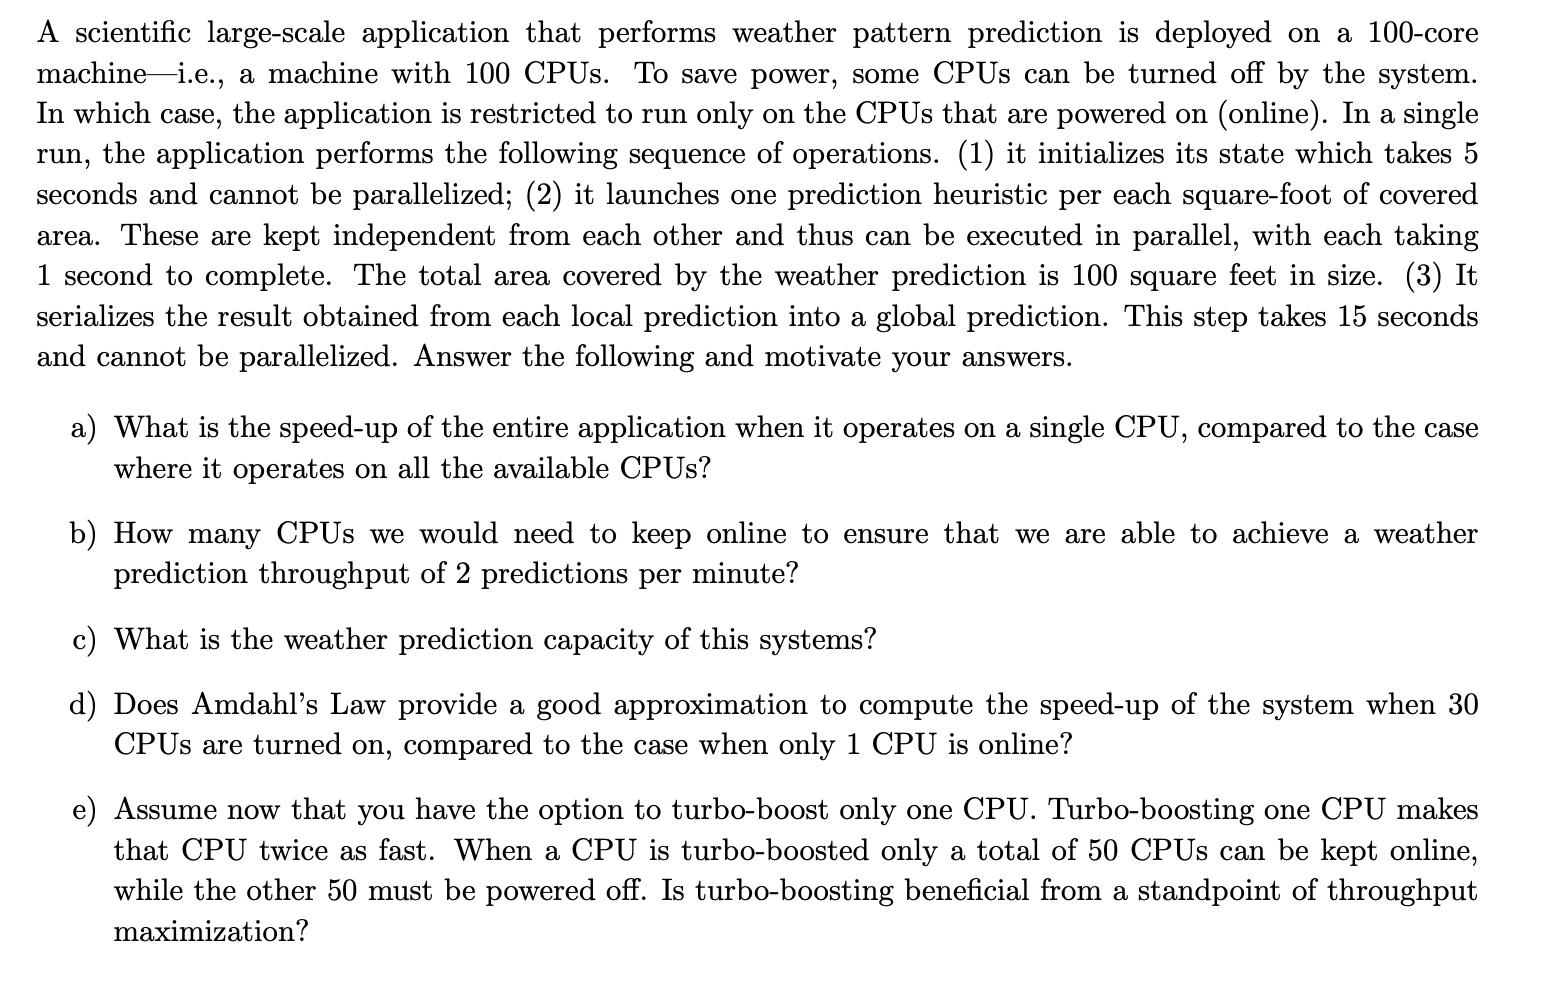 A scientific large-scale application that performs weather pattern prediction is deployed on a 100-core